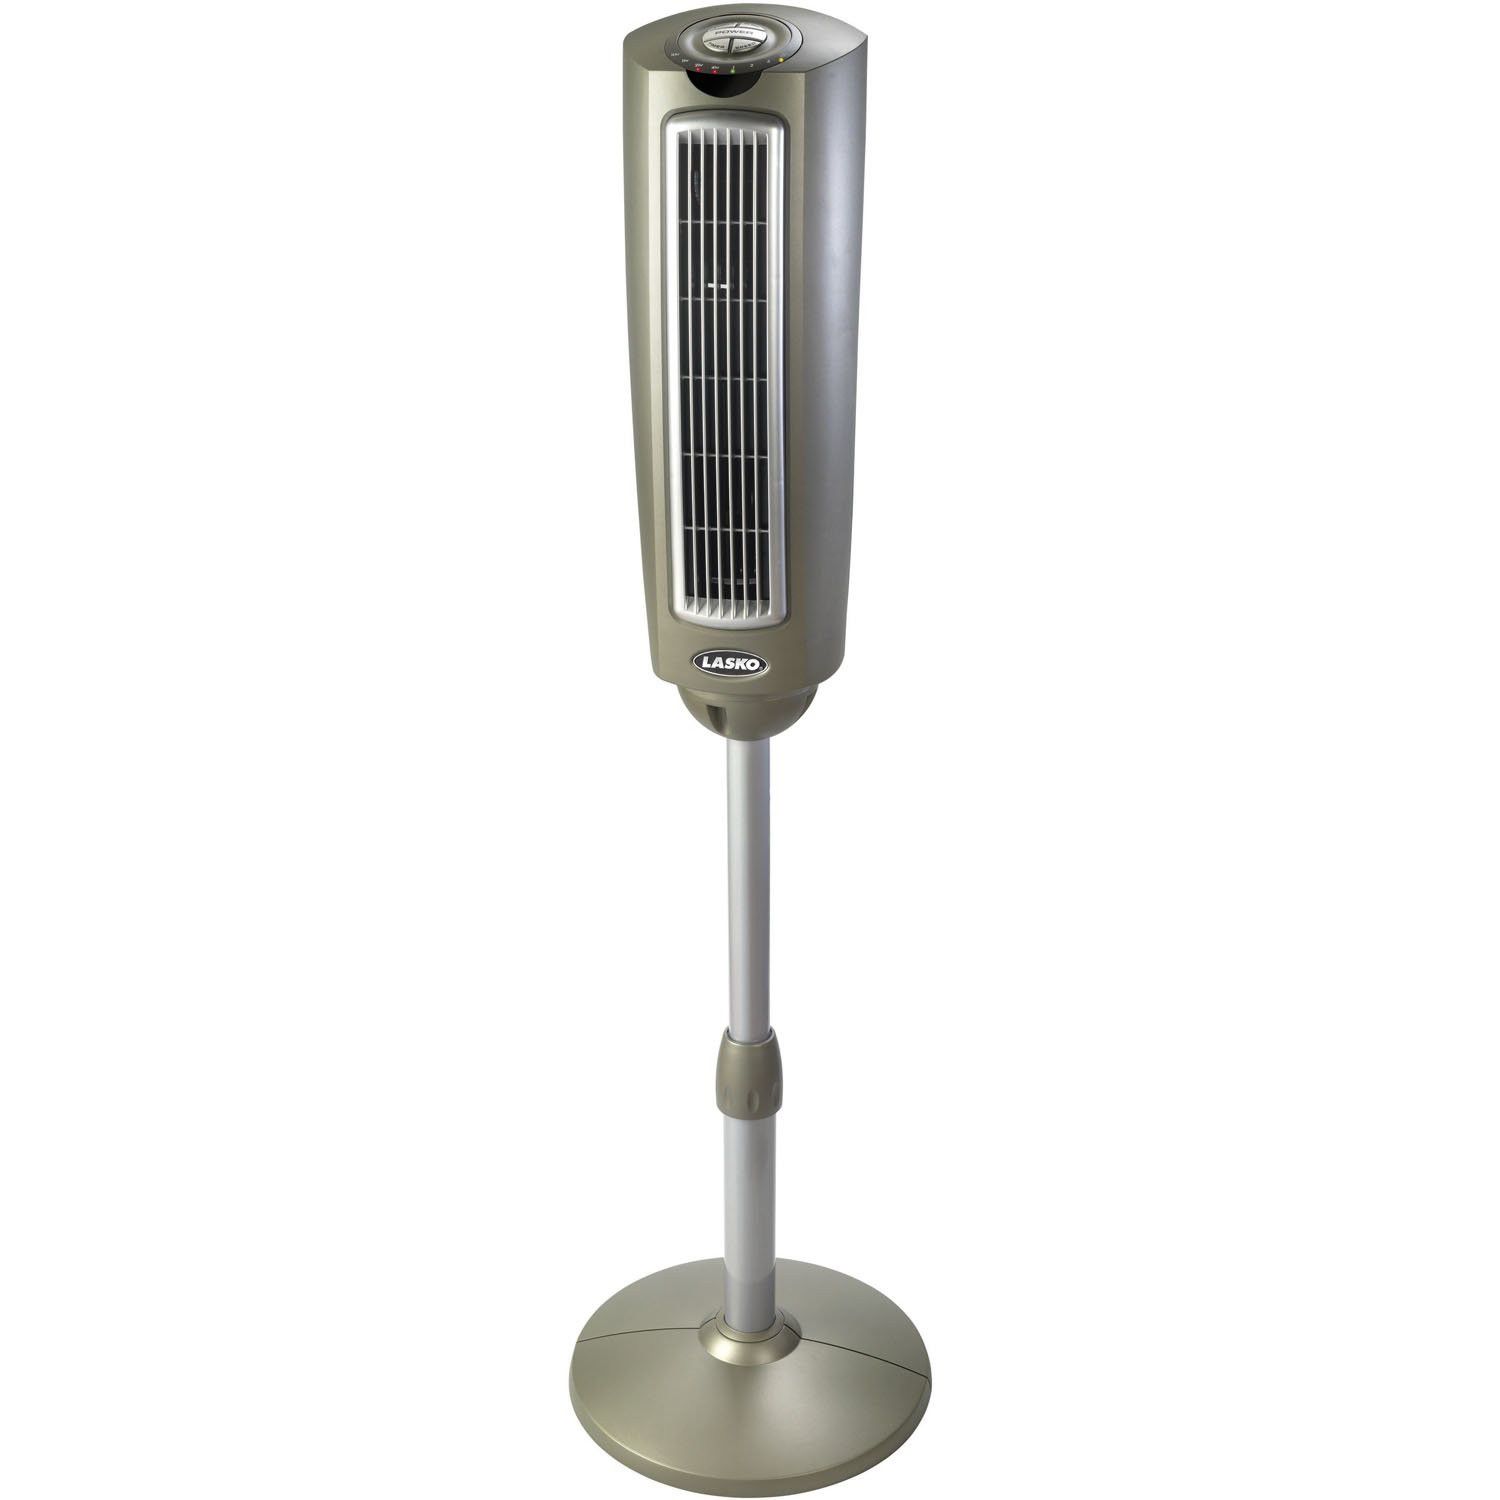 Lasko Lasko 52" Space-Saving 3-Speed Oscillating Adjustable Height Pedestal Tower Fan with Remote Control and Timer, Model 2535, Gray